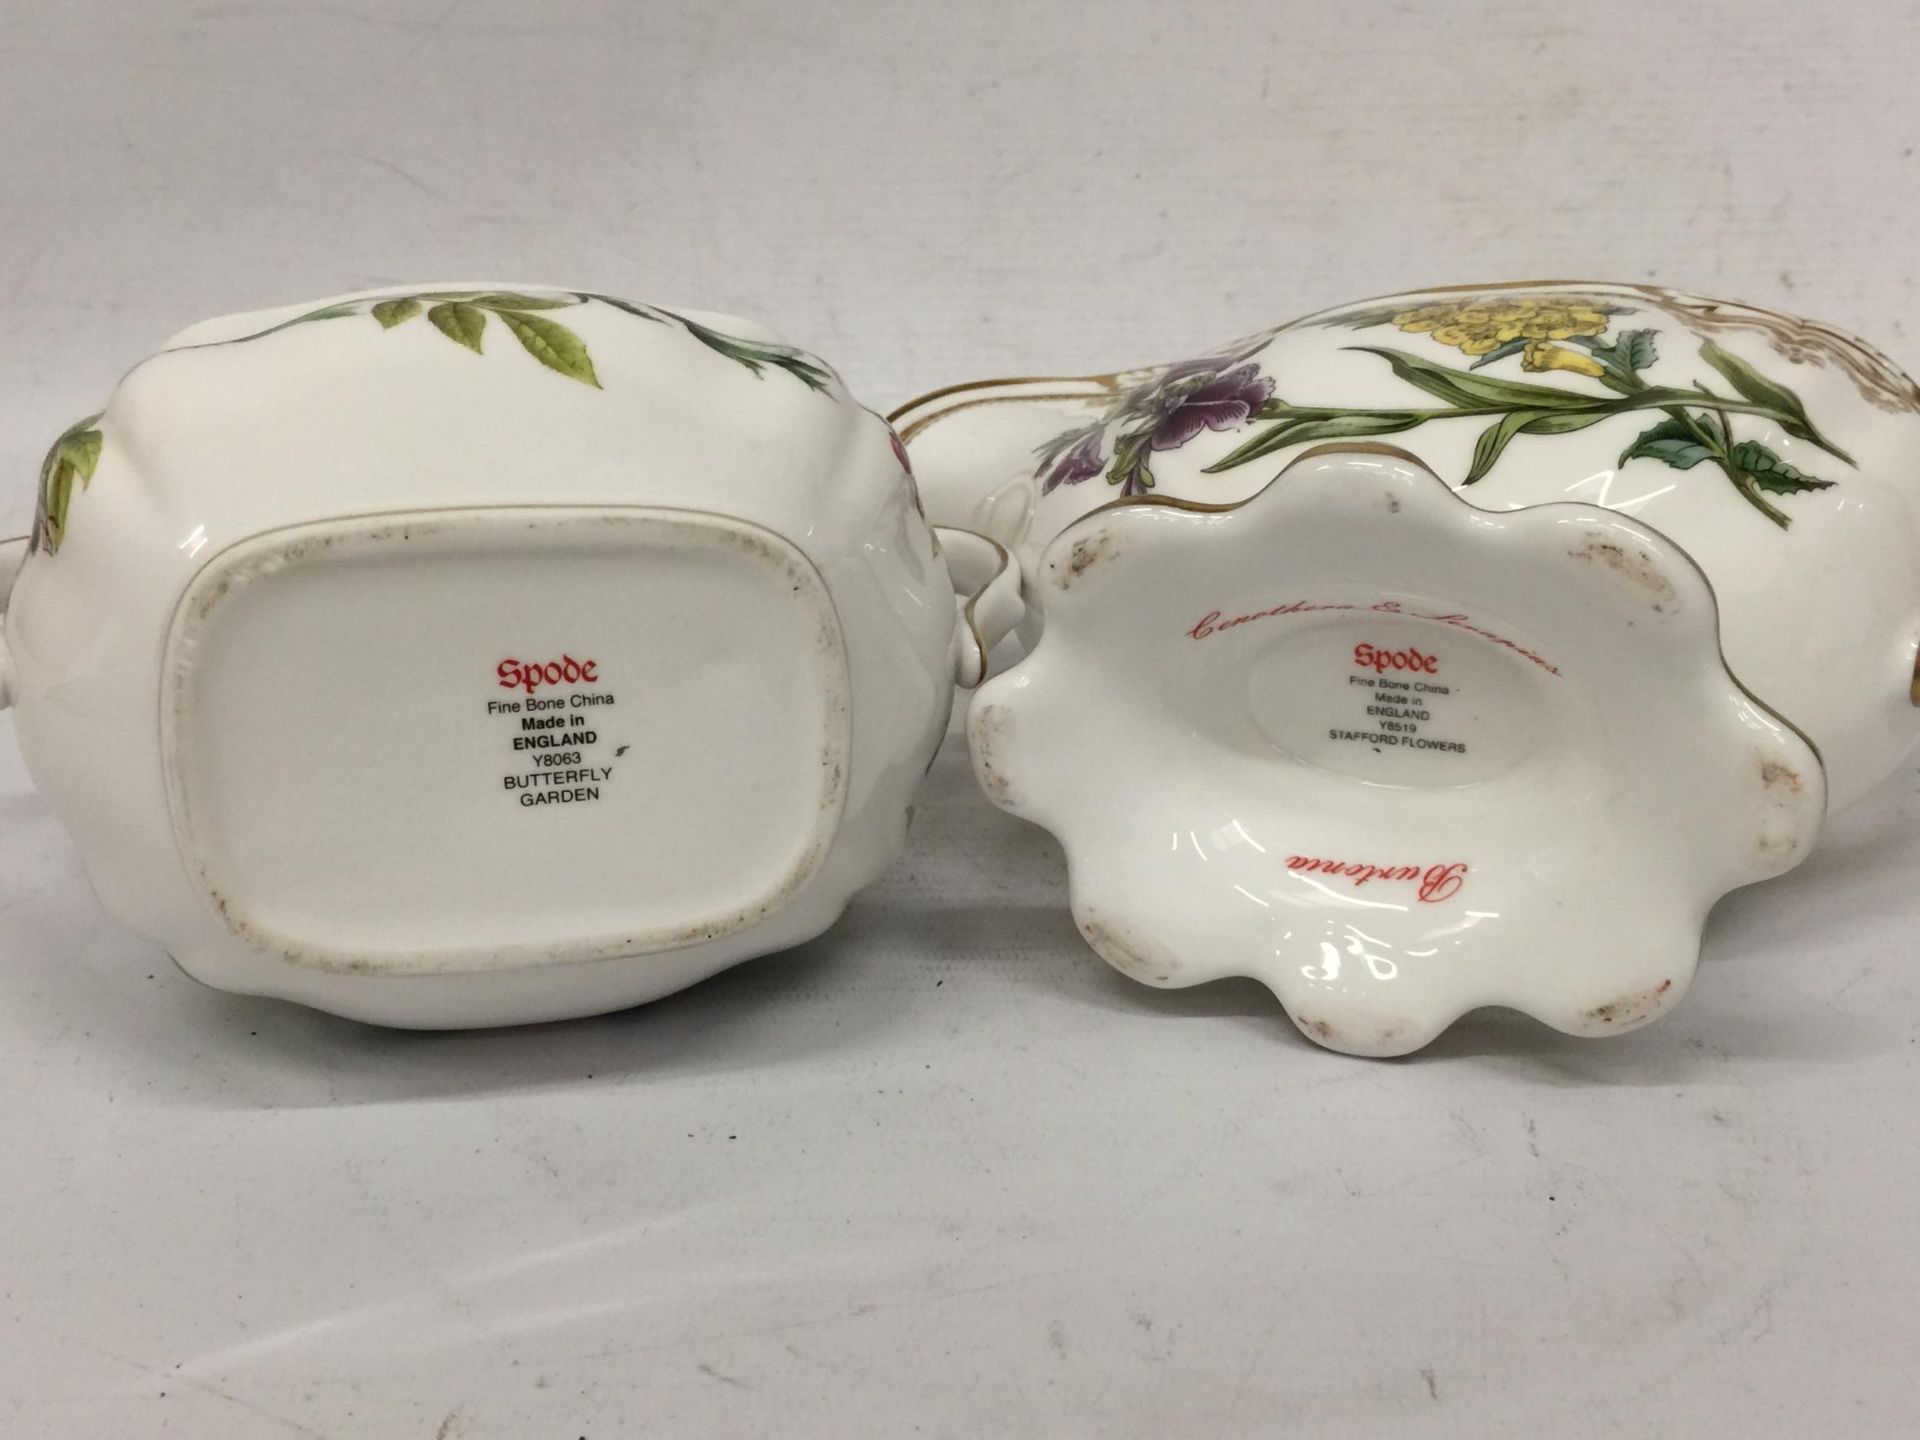 THREE PIECES OF SPODE CERAMICS TO INCLUDE SPODE AERIDES COFFEE POT, STAFFORD FLOWERS CREAM JUG AND - Image 8 of 8